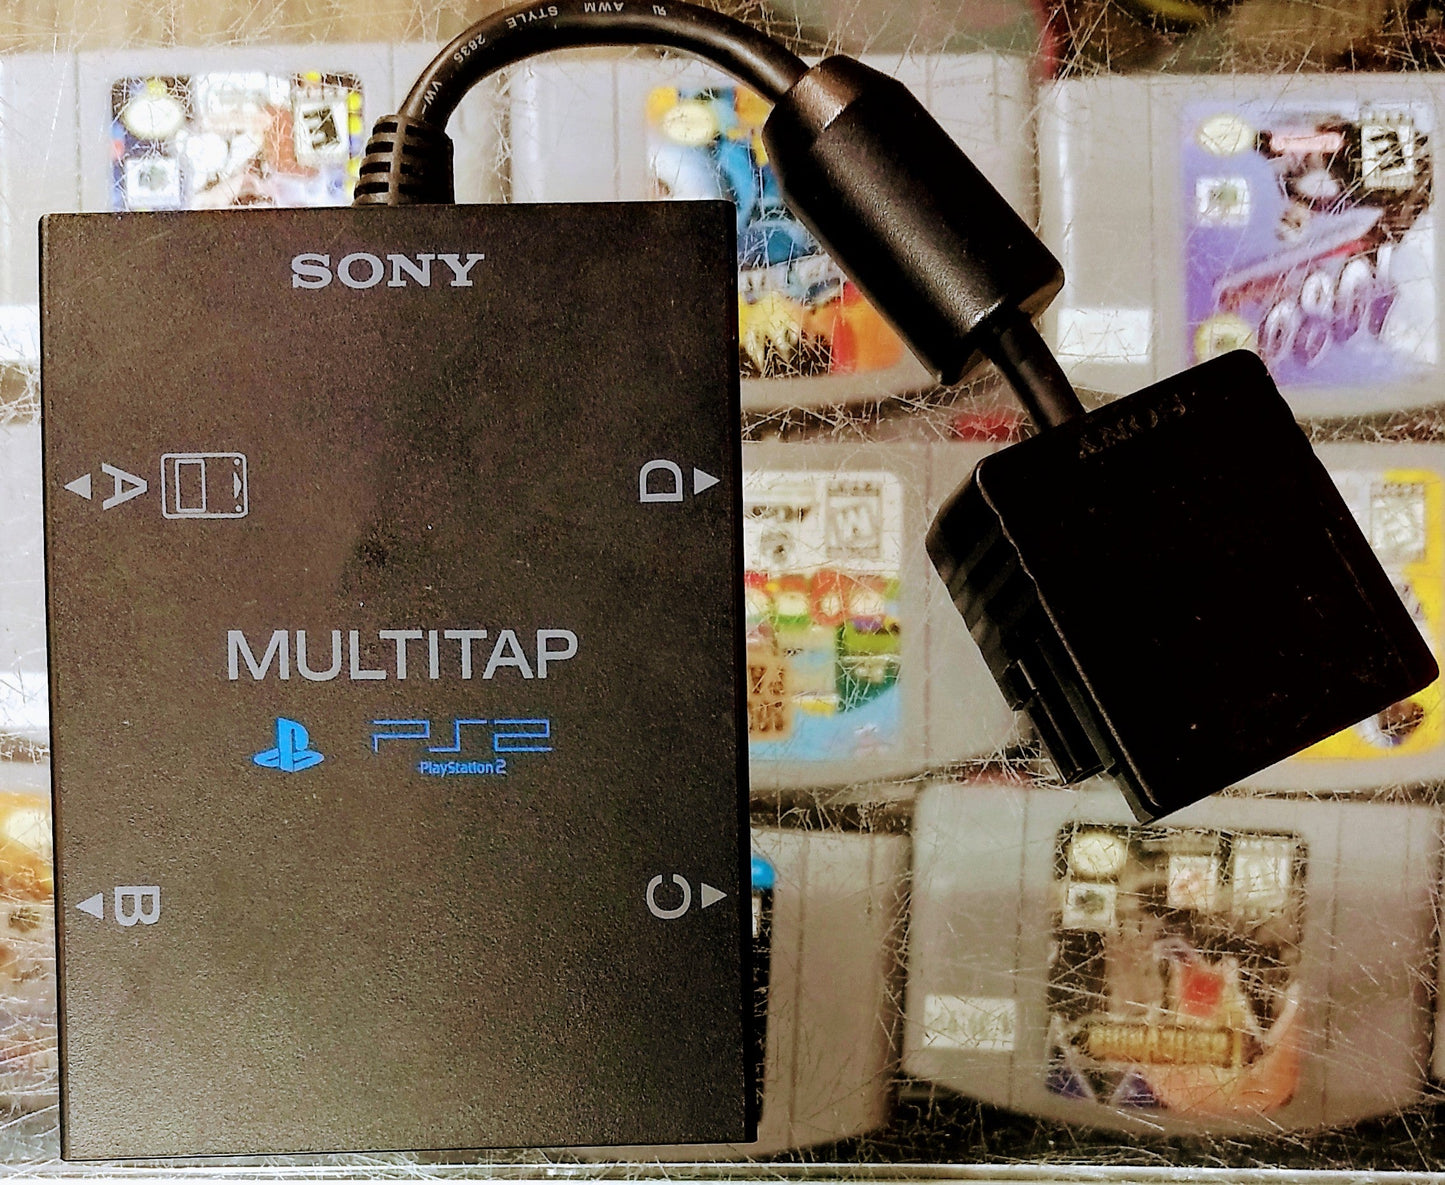 MULTITAP PLAYSTATION 2 PS2